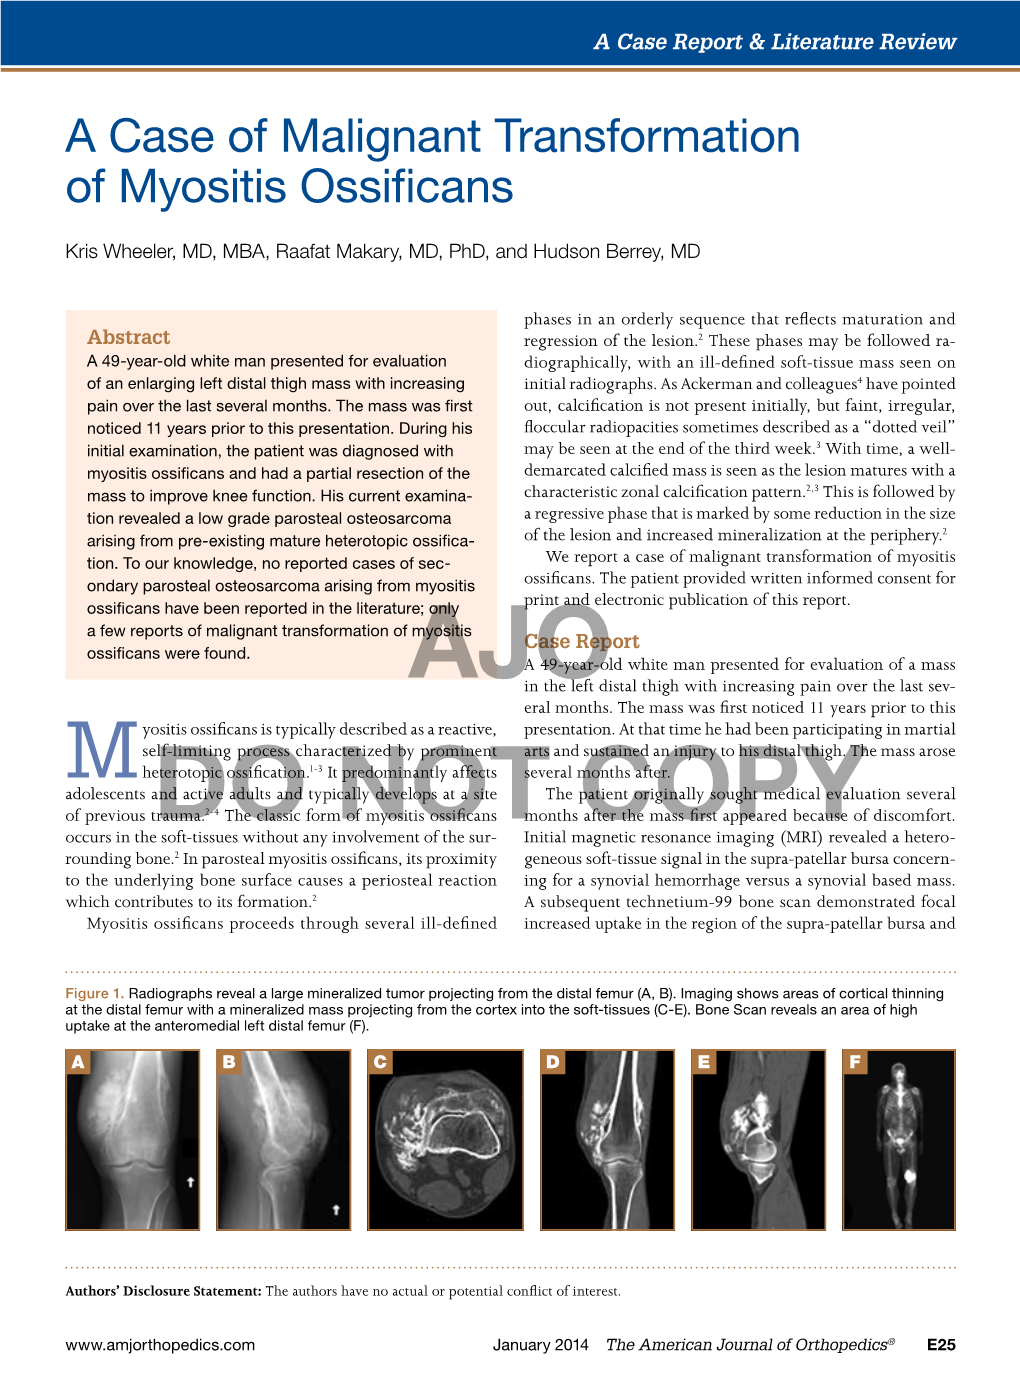 A Case of Malignant Transformation of Myositis Ossificans